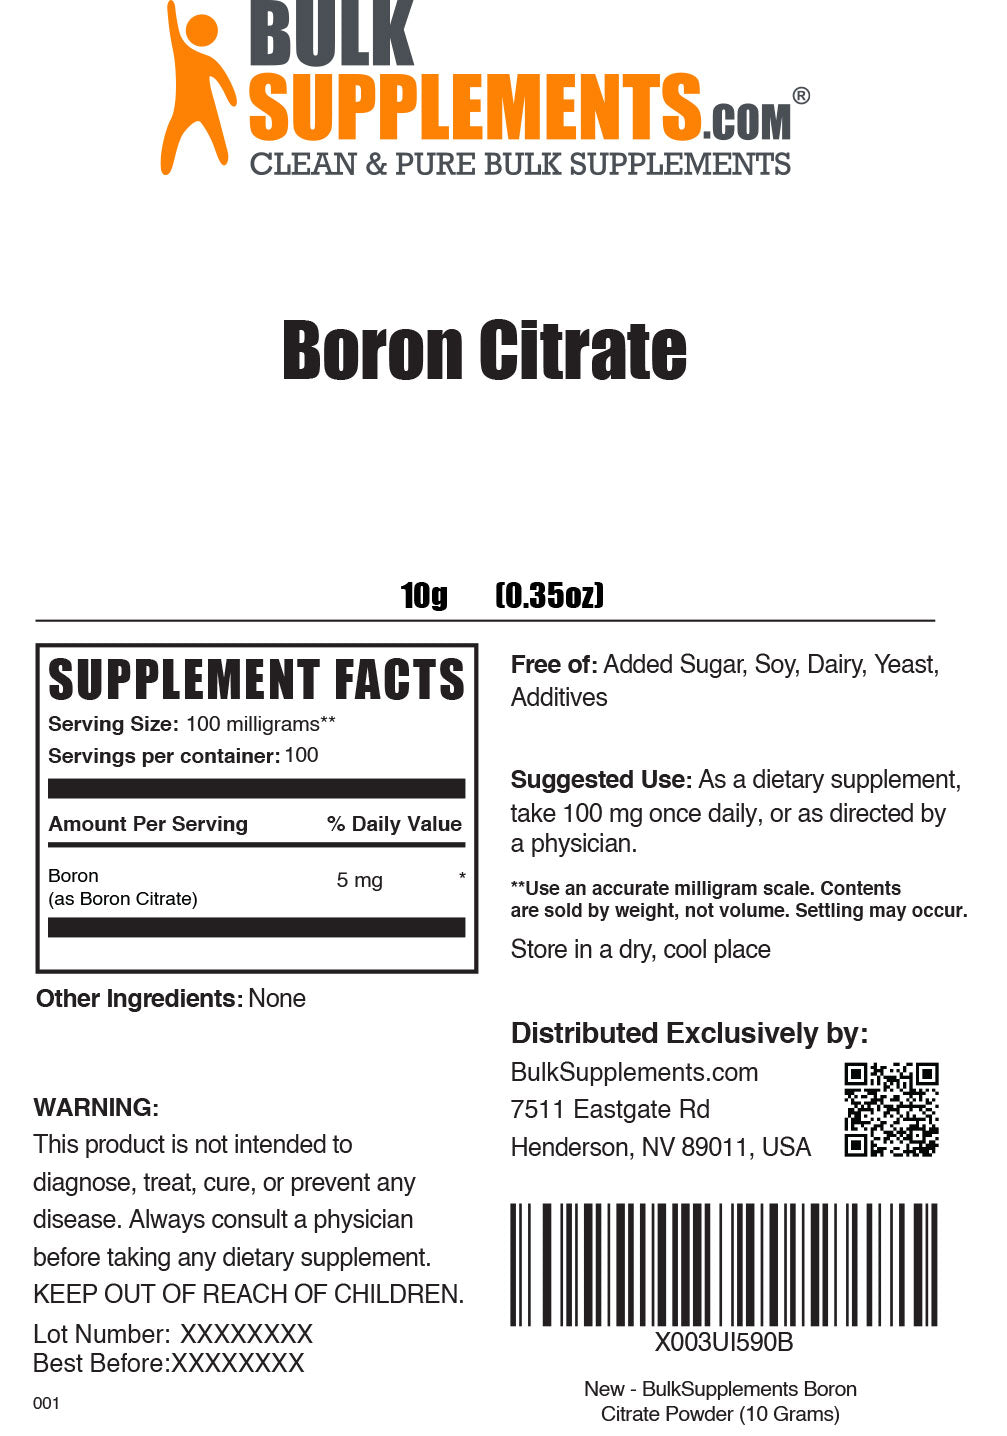 10g of Boron Citrate Supplement Facts